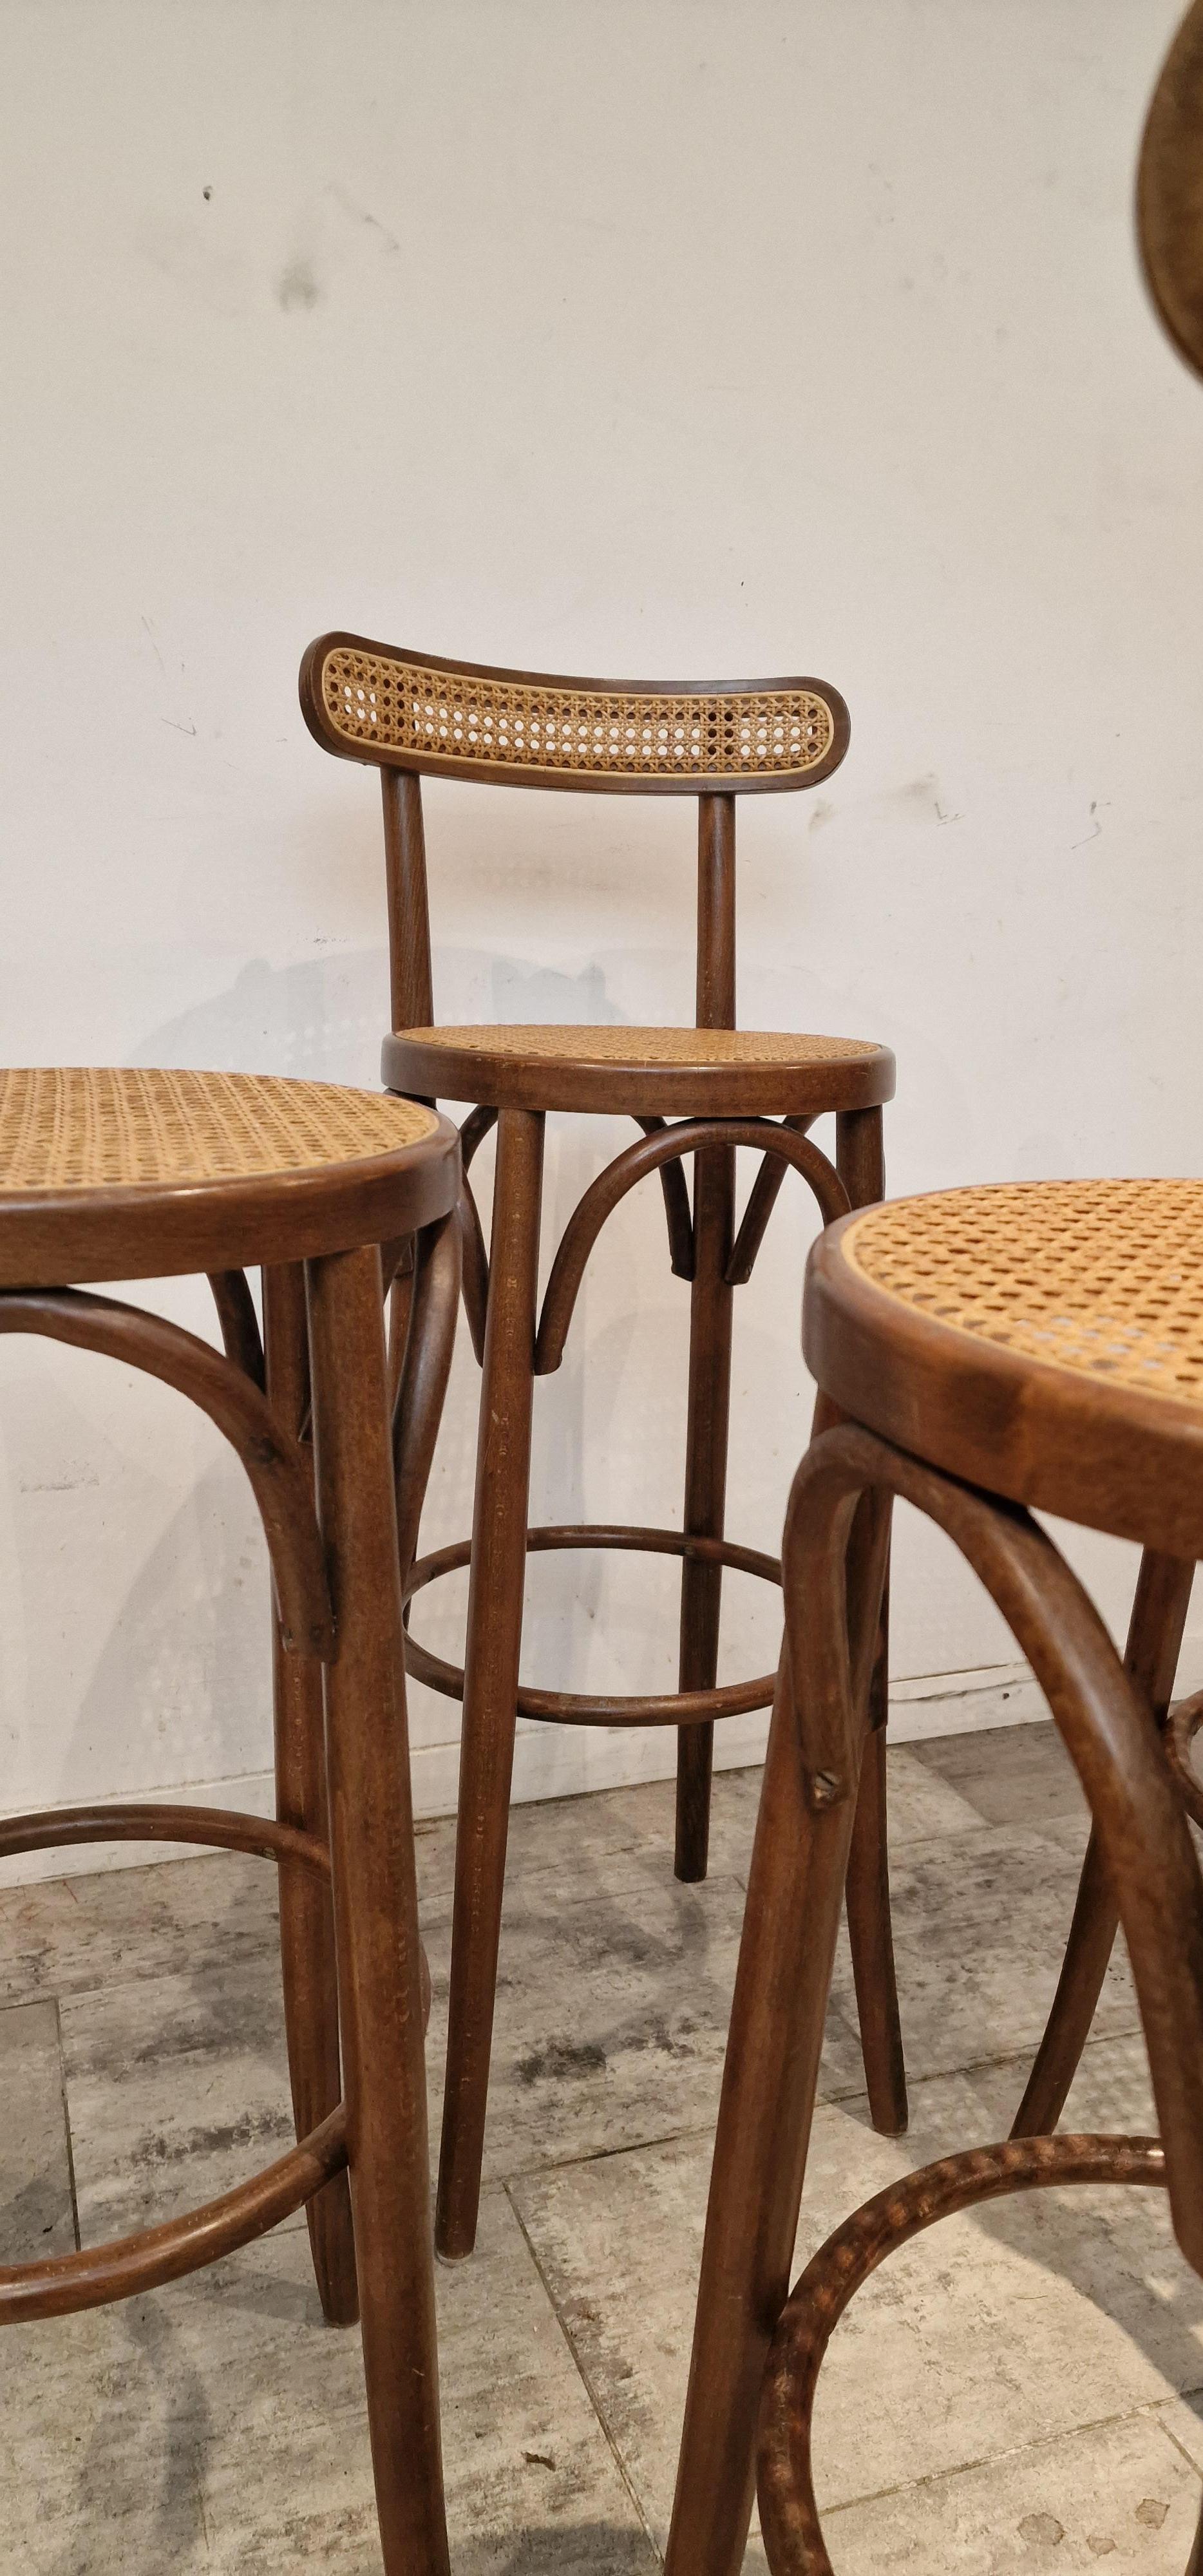 Set of 4 Canned, wooden barstools, French 1980s.